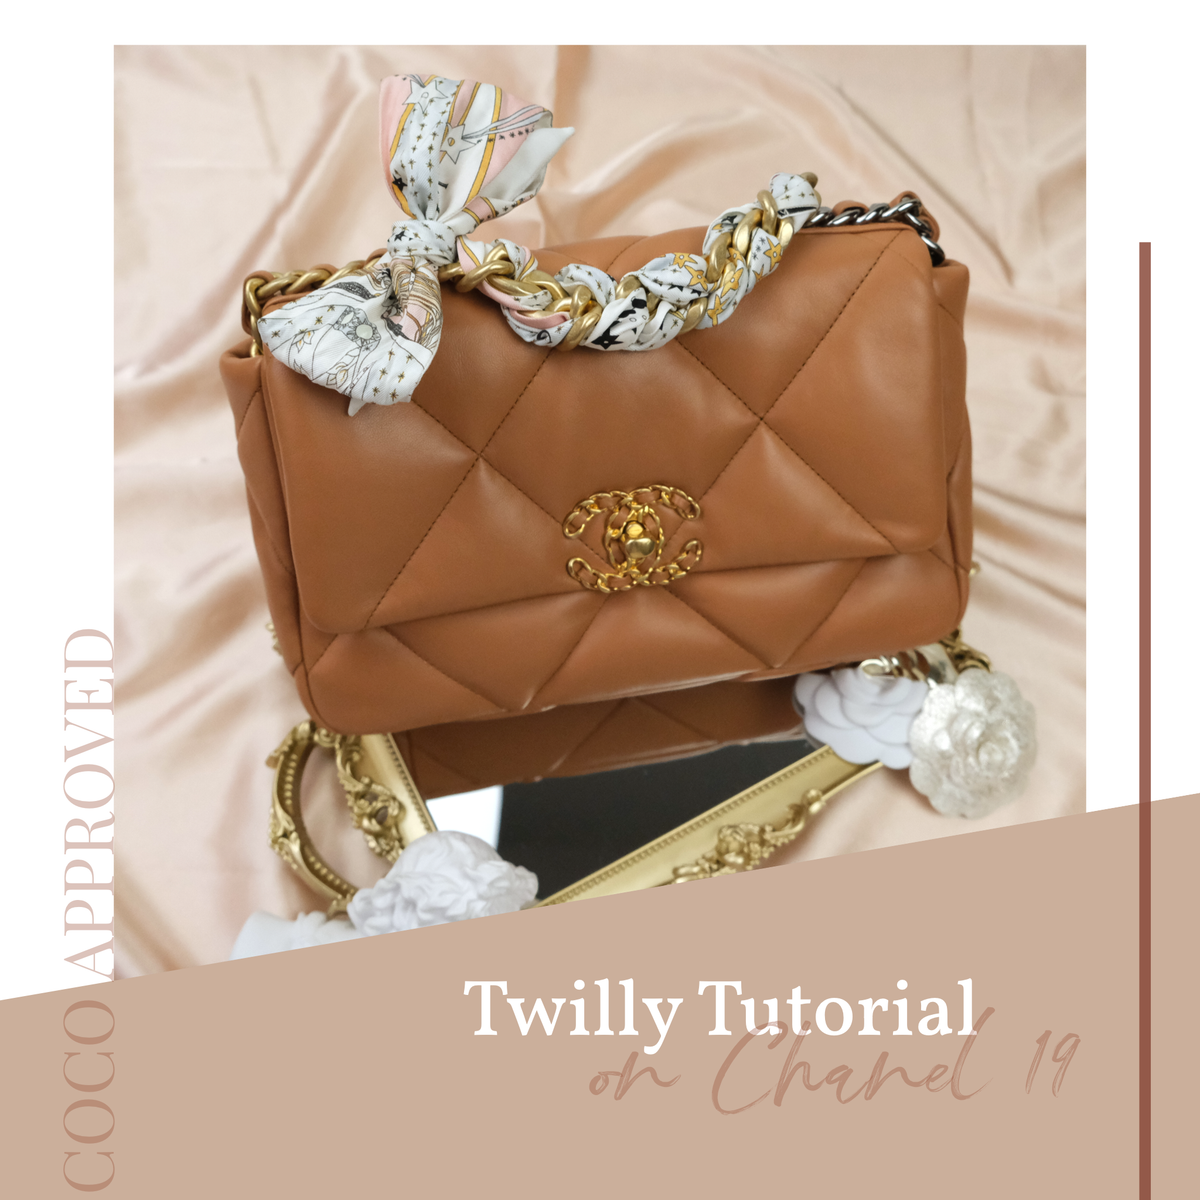 Add-on Twilly Handle On Chanel Vanity With Chain - Twilly Tutorial